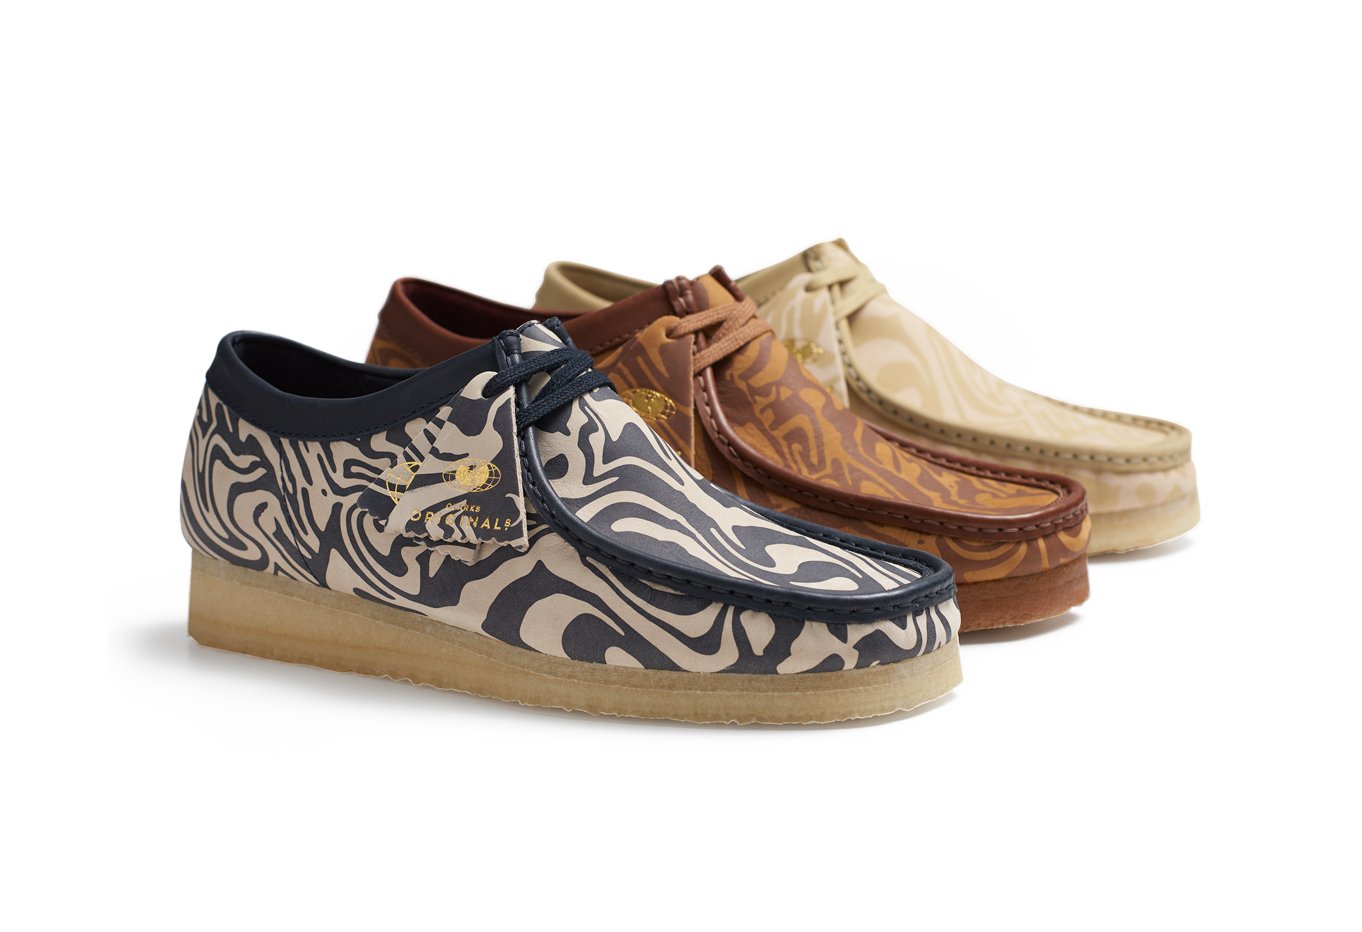 Clarks Originals Releasing Wu-Tang Clan Collection Featuring the Wallabee